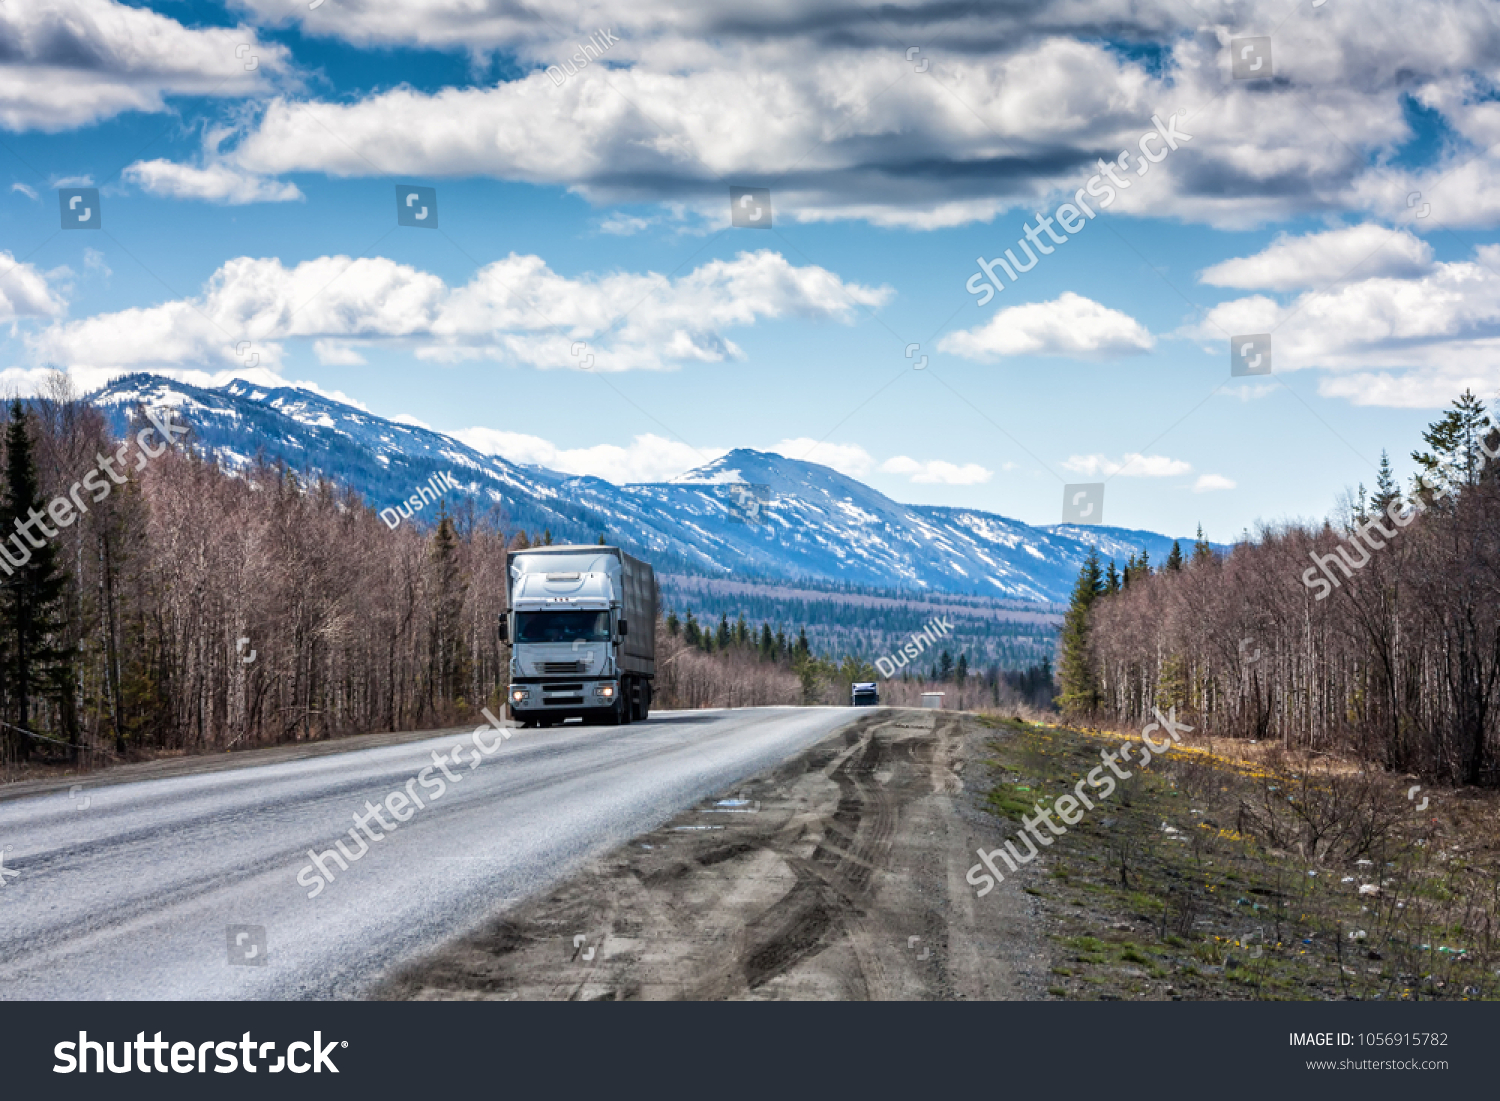 A long-distance truck with a semitrailer moves on the road among the mountains covered with snow #1056915782